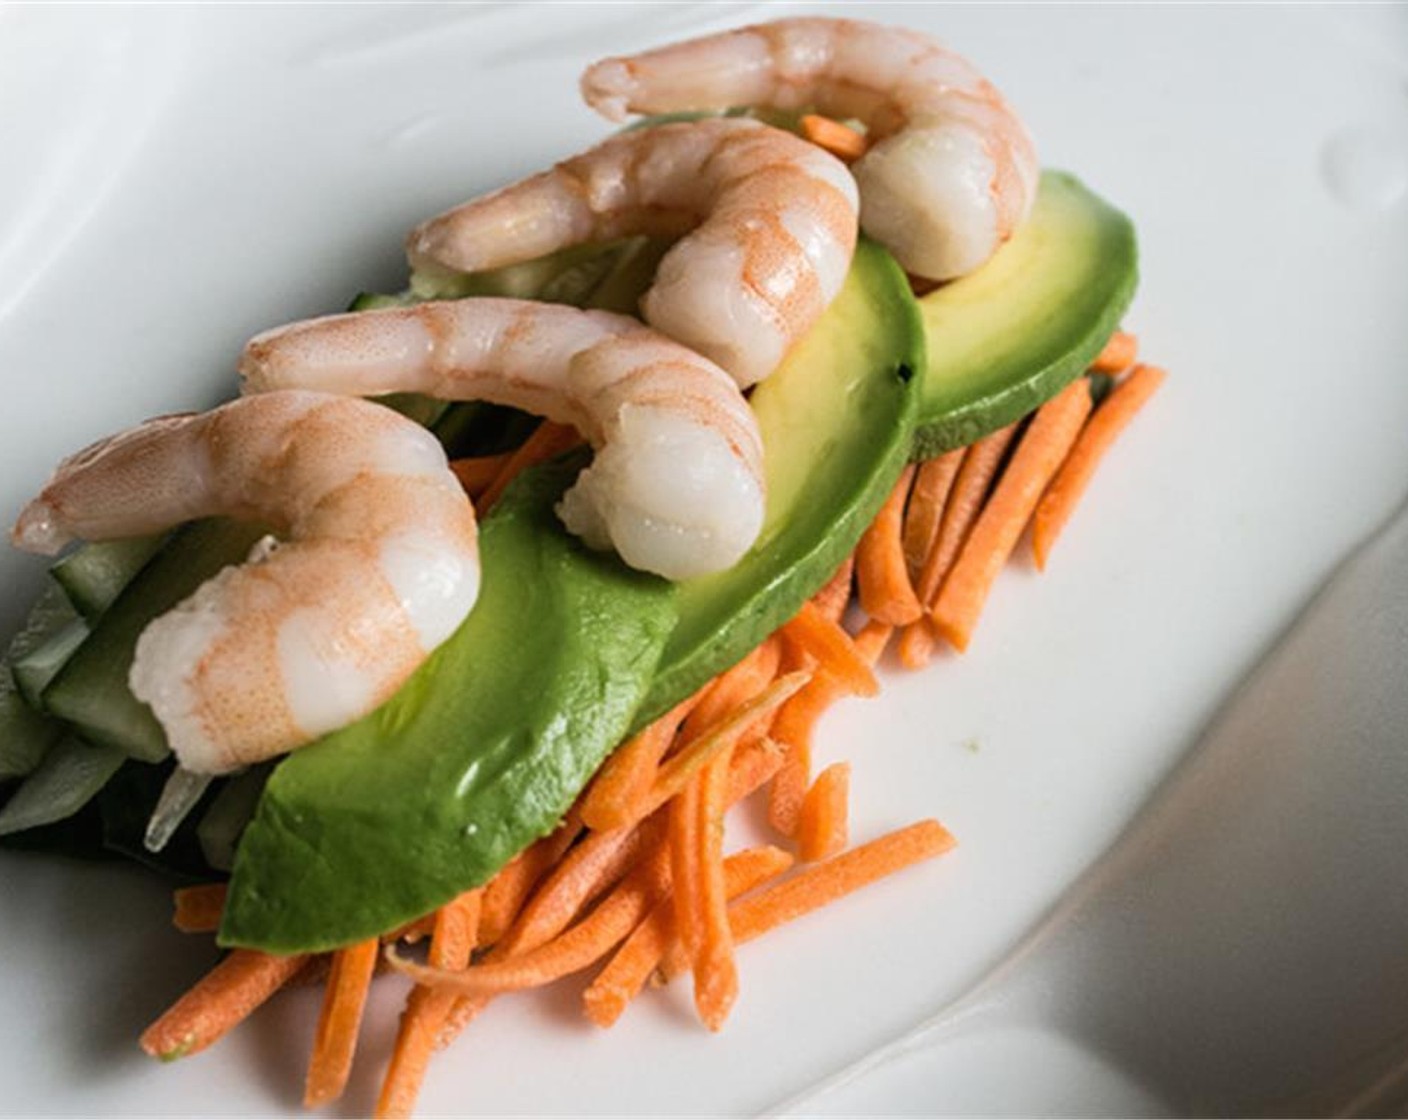 step 2 Gently pat wrapper dry, then arrange vegetables in the center of each wrapper. Start with the Spinach Leaves (2 cups), then top with strips of Cucumber (1) and shreds of Carrot (1 cup), followed by Avocado (1), then topped with Medium-Large Cooked Shrimp (24), four per roll.